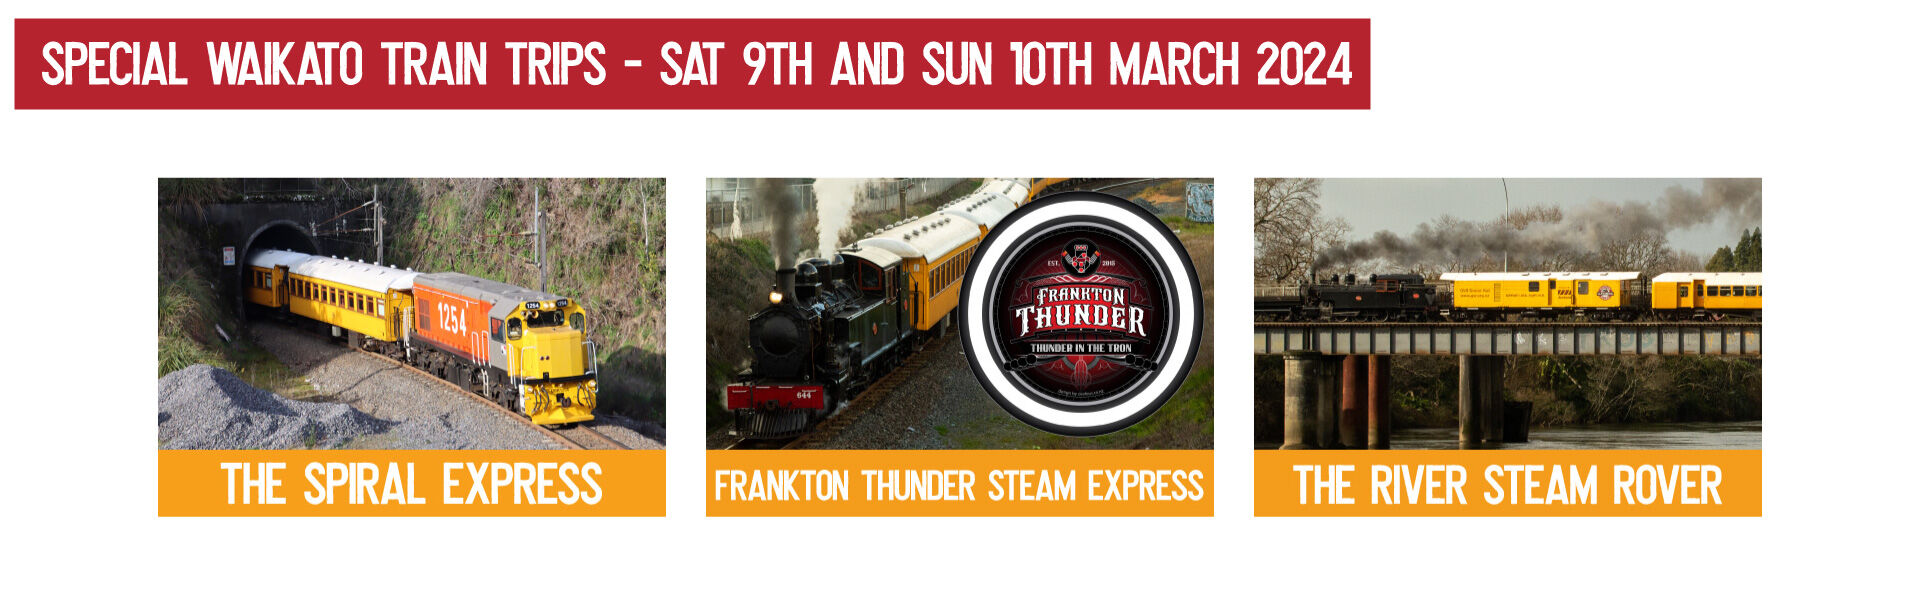 Jump on board with the Glenbrook Vintage Railway in association with Frankton Thunder for a weekend of metal and muscle based around Hamilton's Frankton Station!